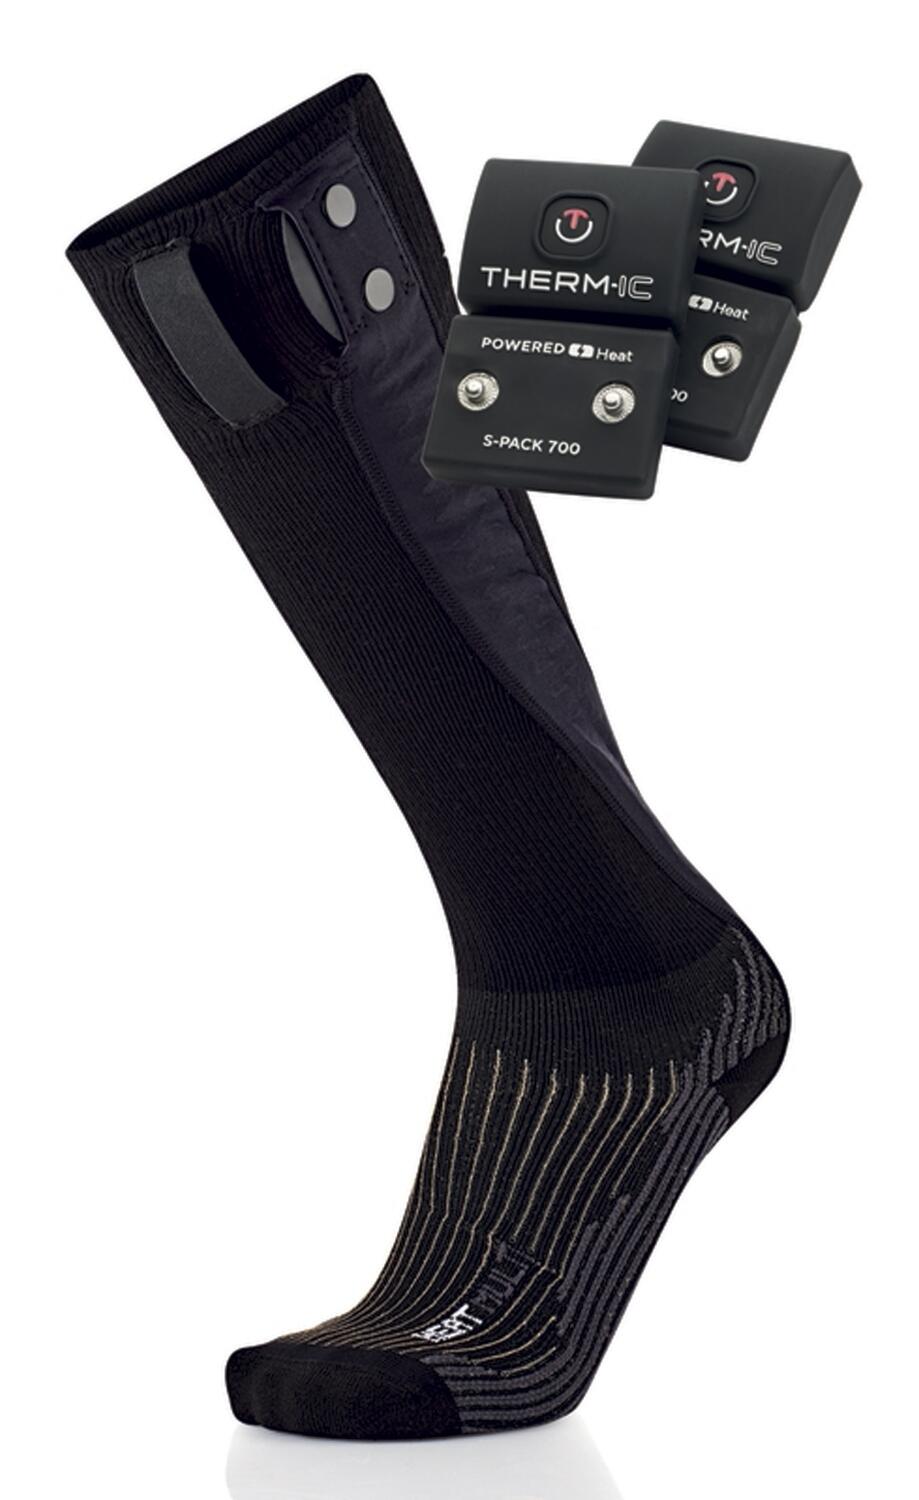 Therm-ic PowerSock Set Heat Multi + SPack 700 V2